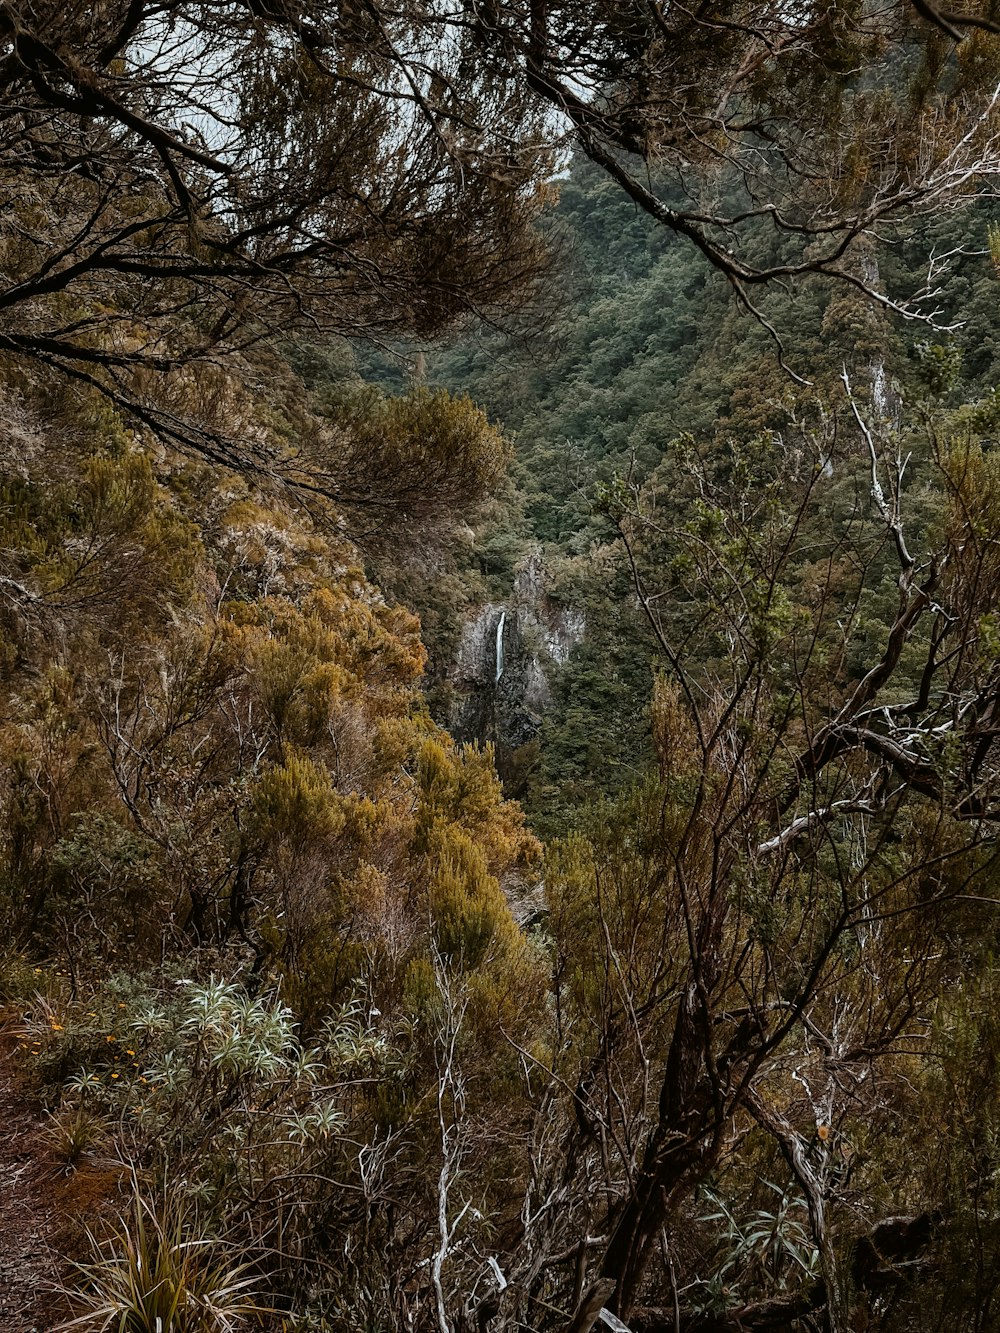 a view of a waterfall through some trees